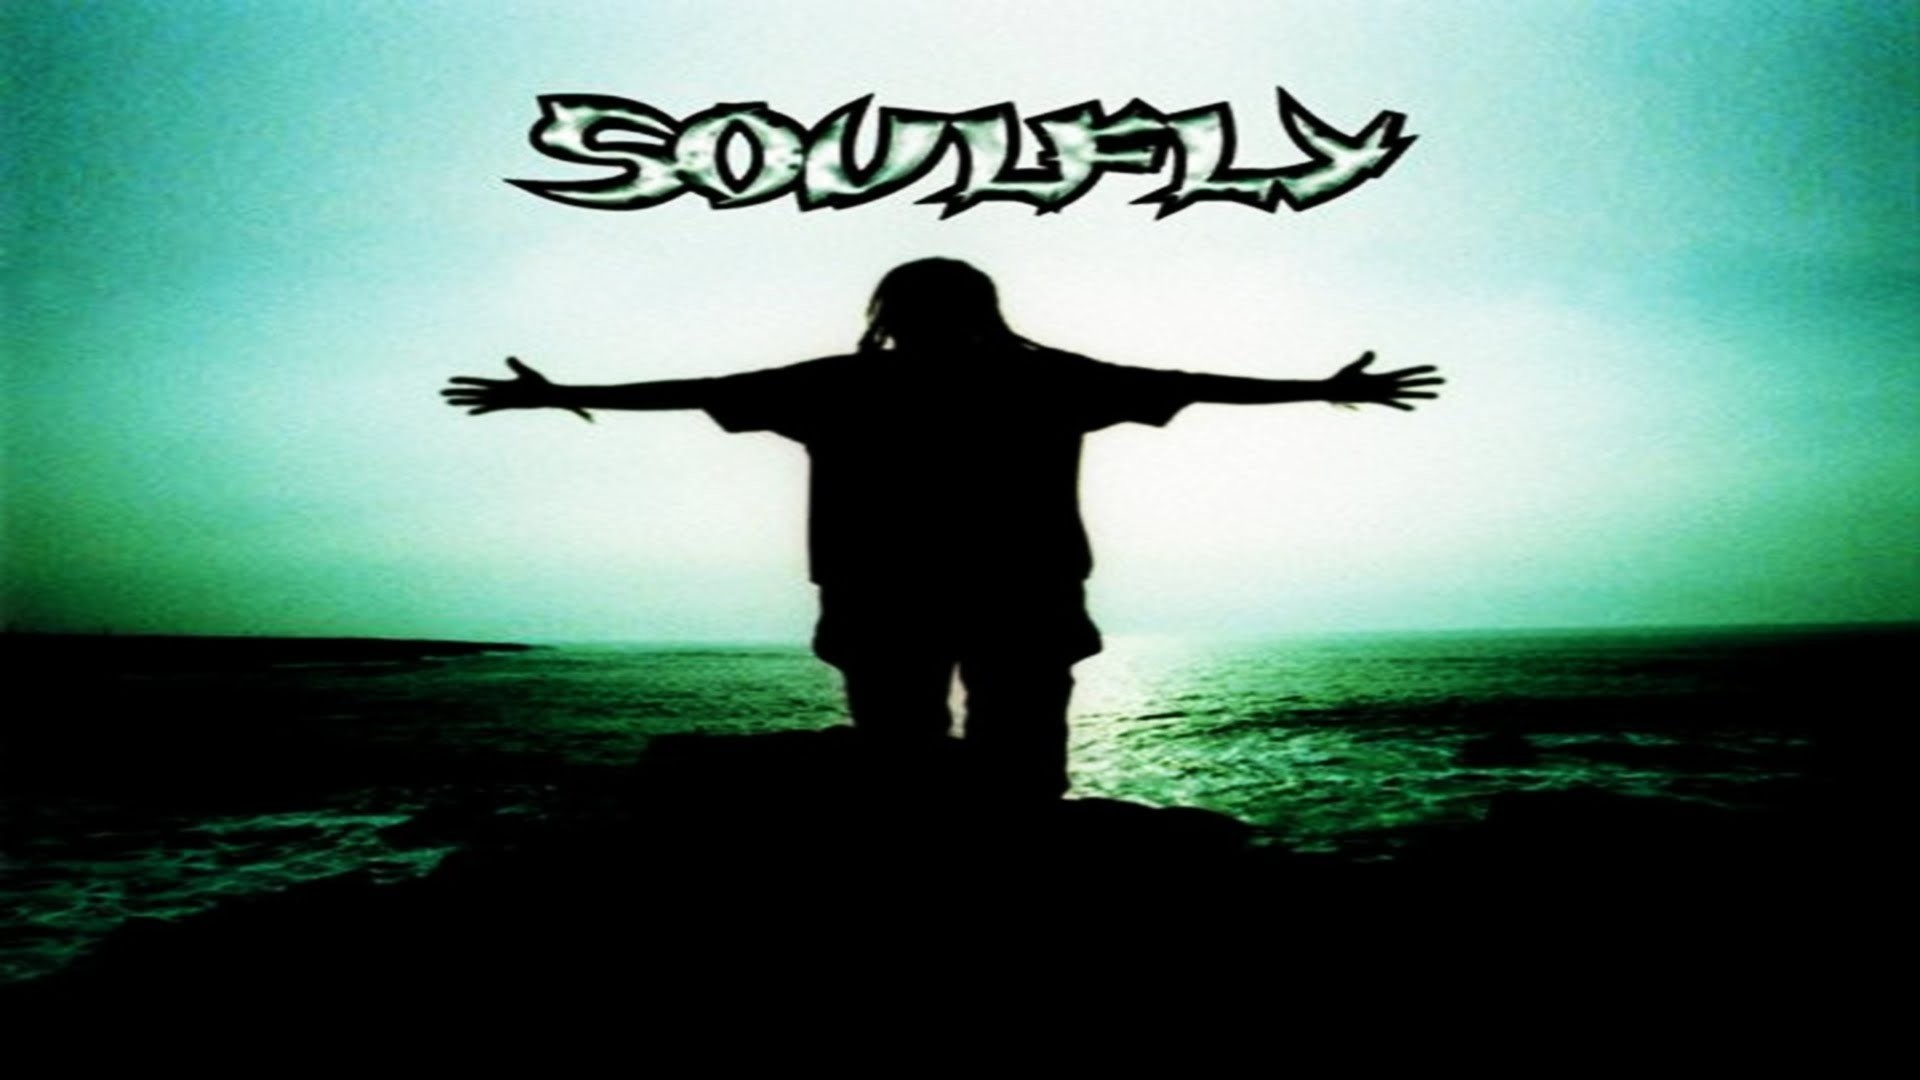 Soulfly Wallpapers (73+ images)